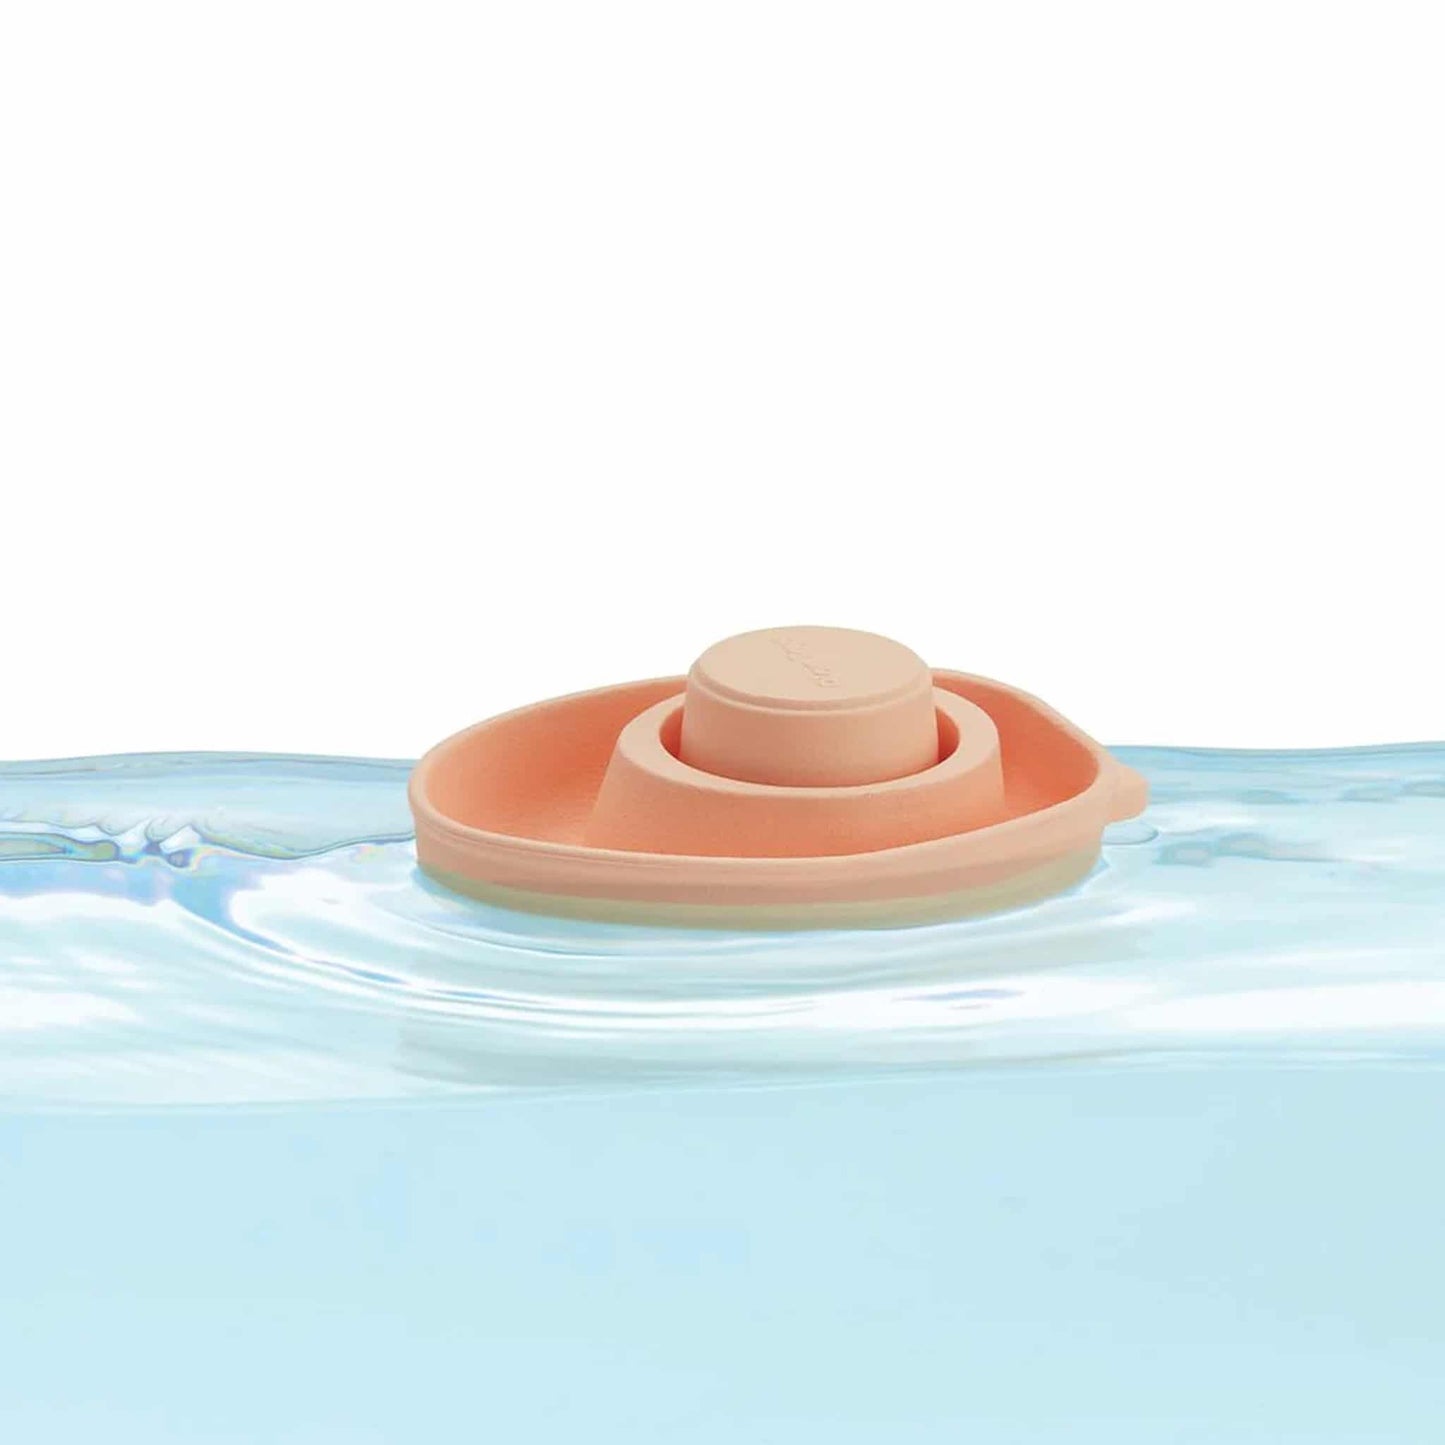 Plan Toys Rubber Convertible Boat Floating